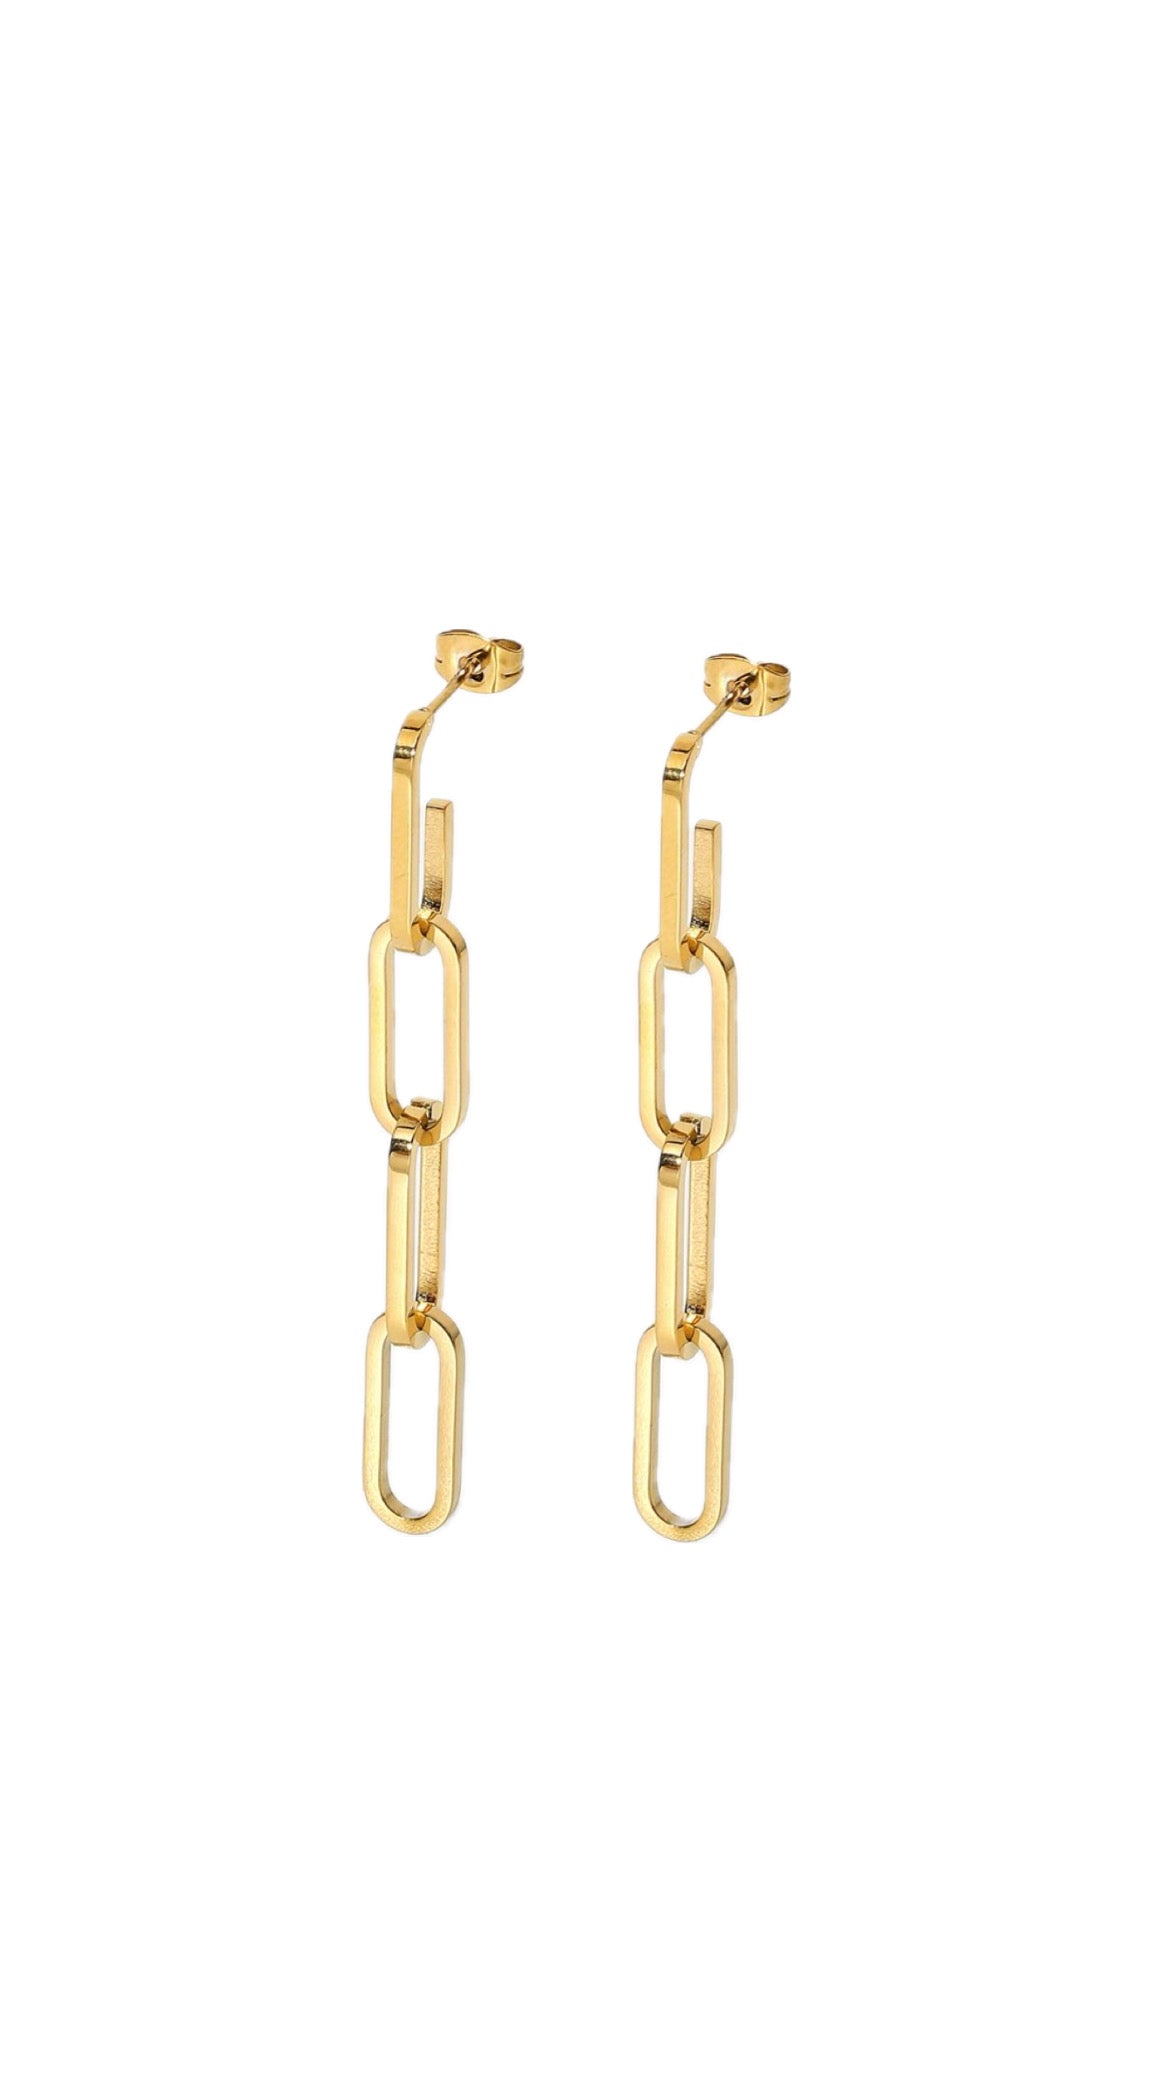 Paper ClipIntroducing our Paperclip Earrings in 18K gold plating. These minimalist yet striking earrings redefine modern elegance. Crafted with attention to detail, they featuStainless SteelPaper Clip